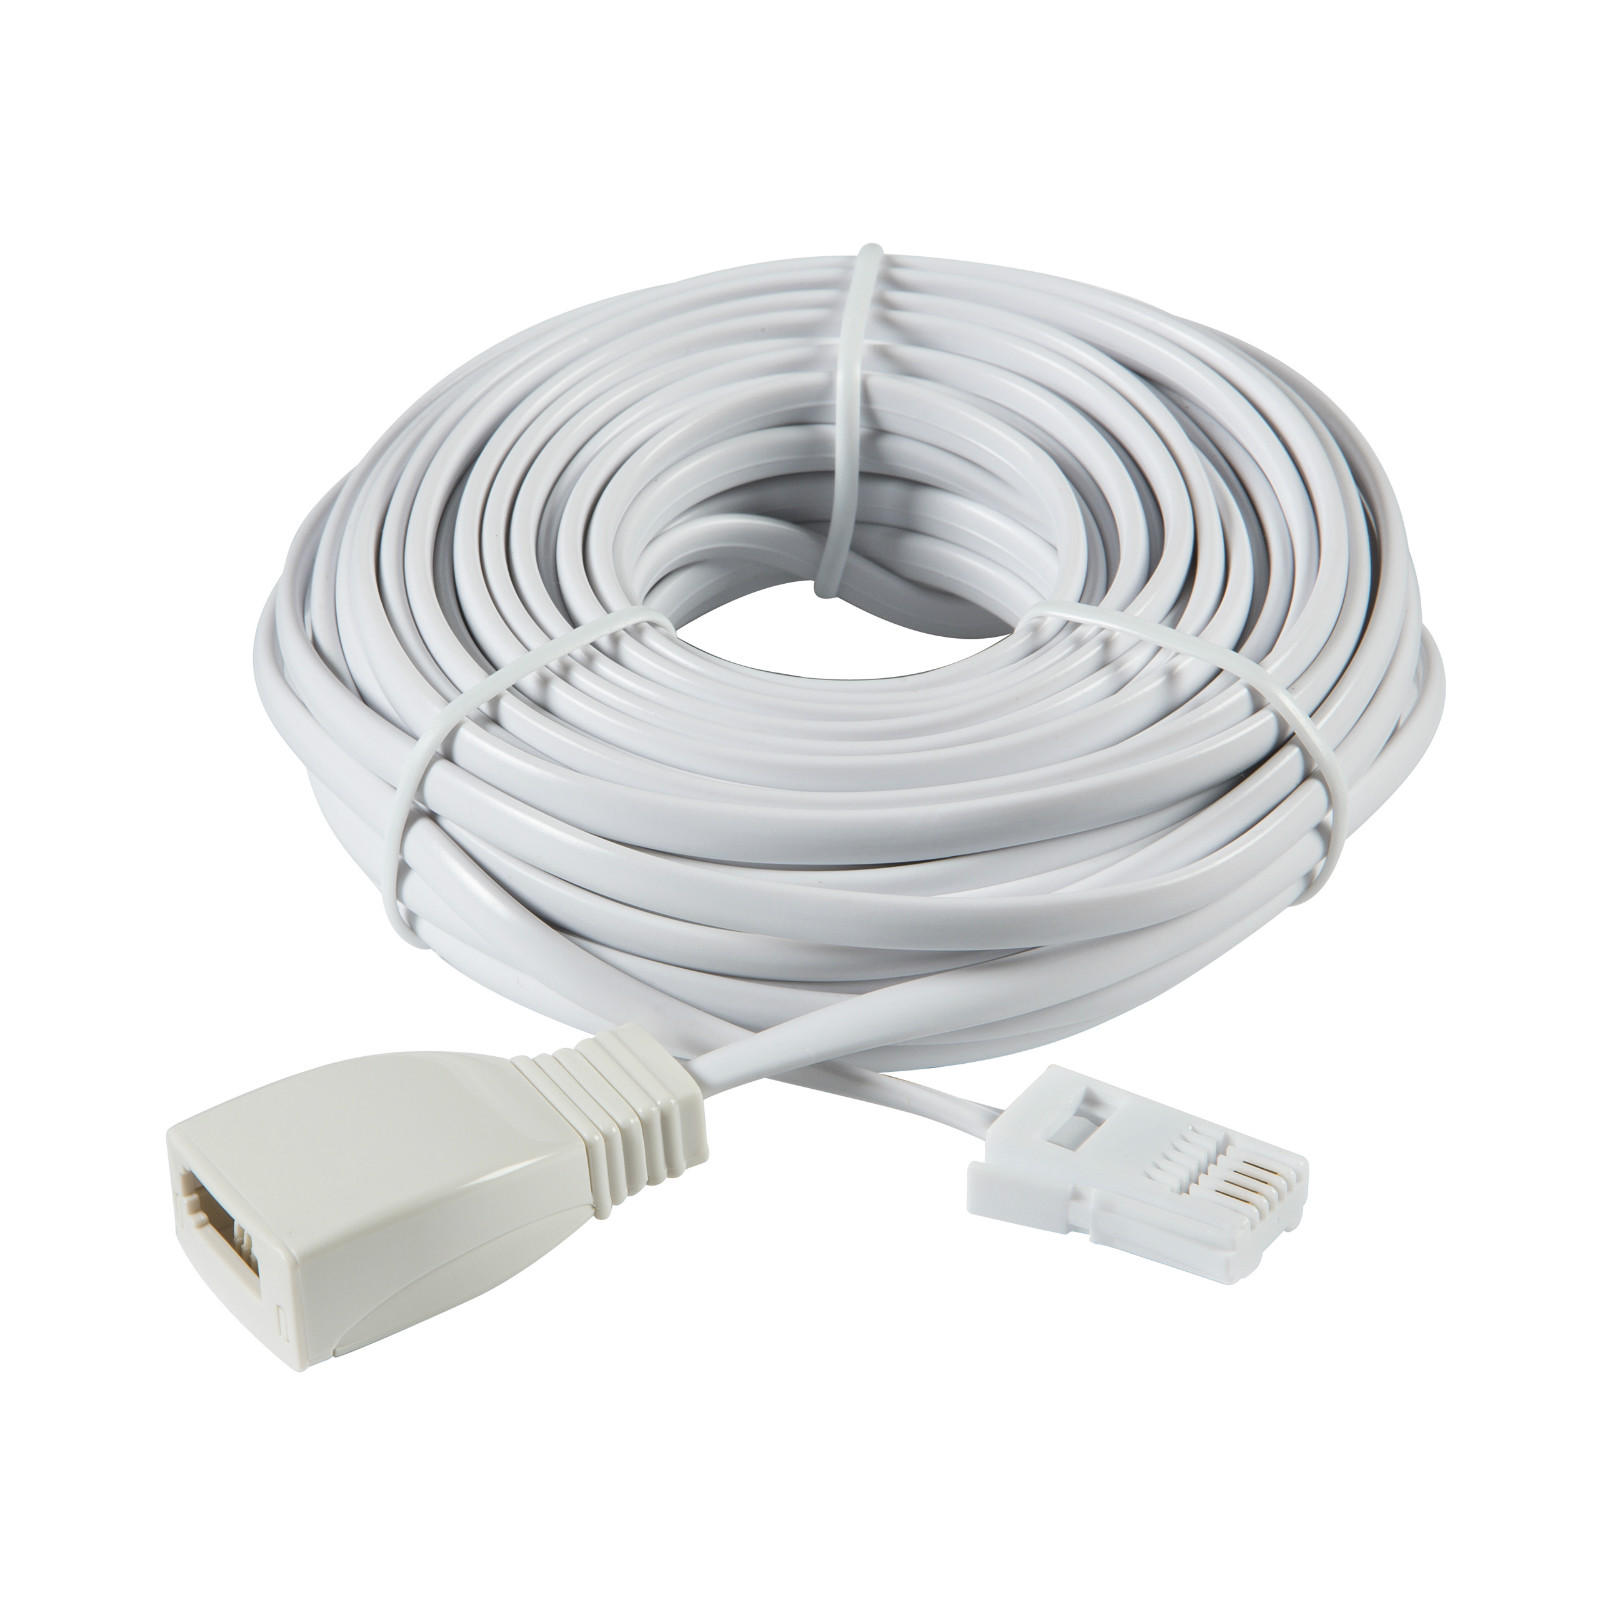 5m Telephone Extension Cable - LJ005 